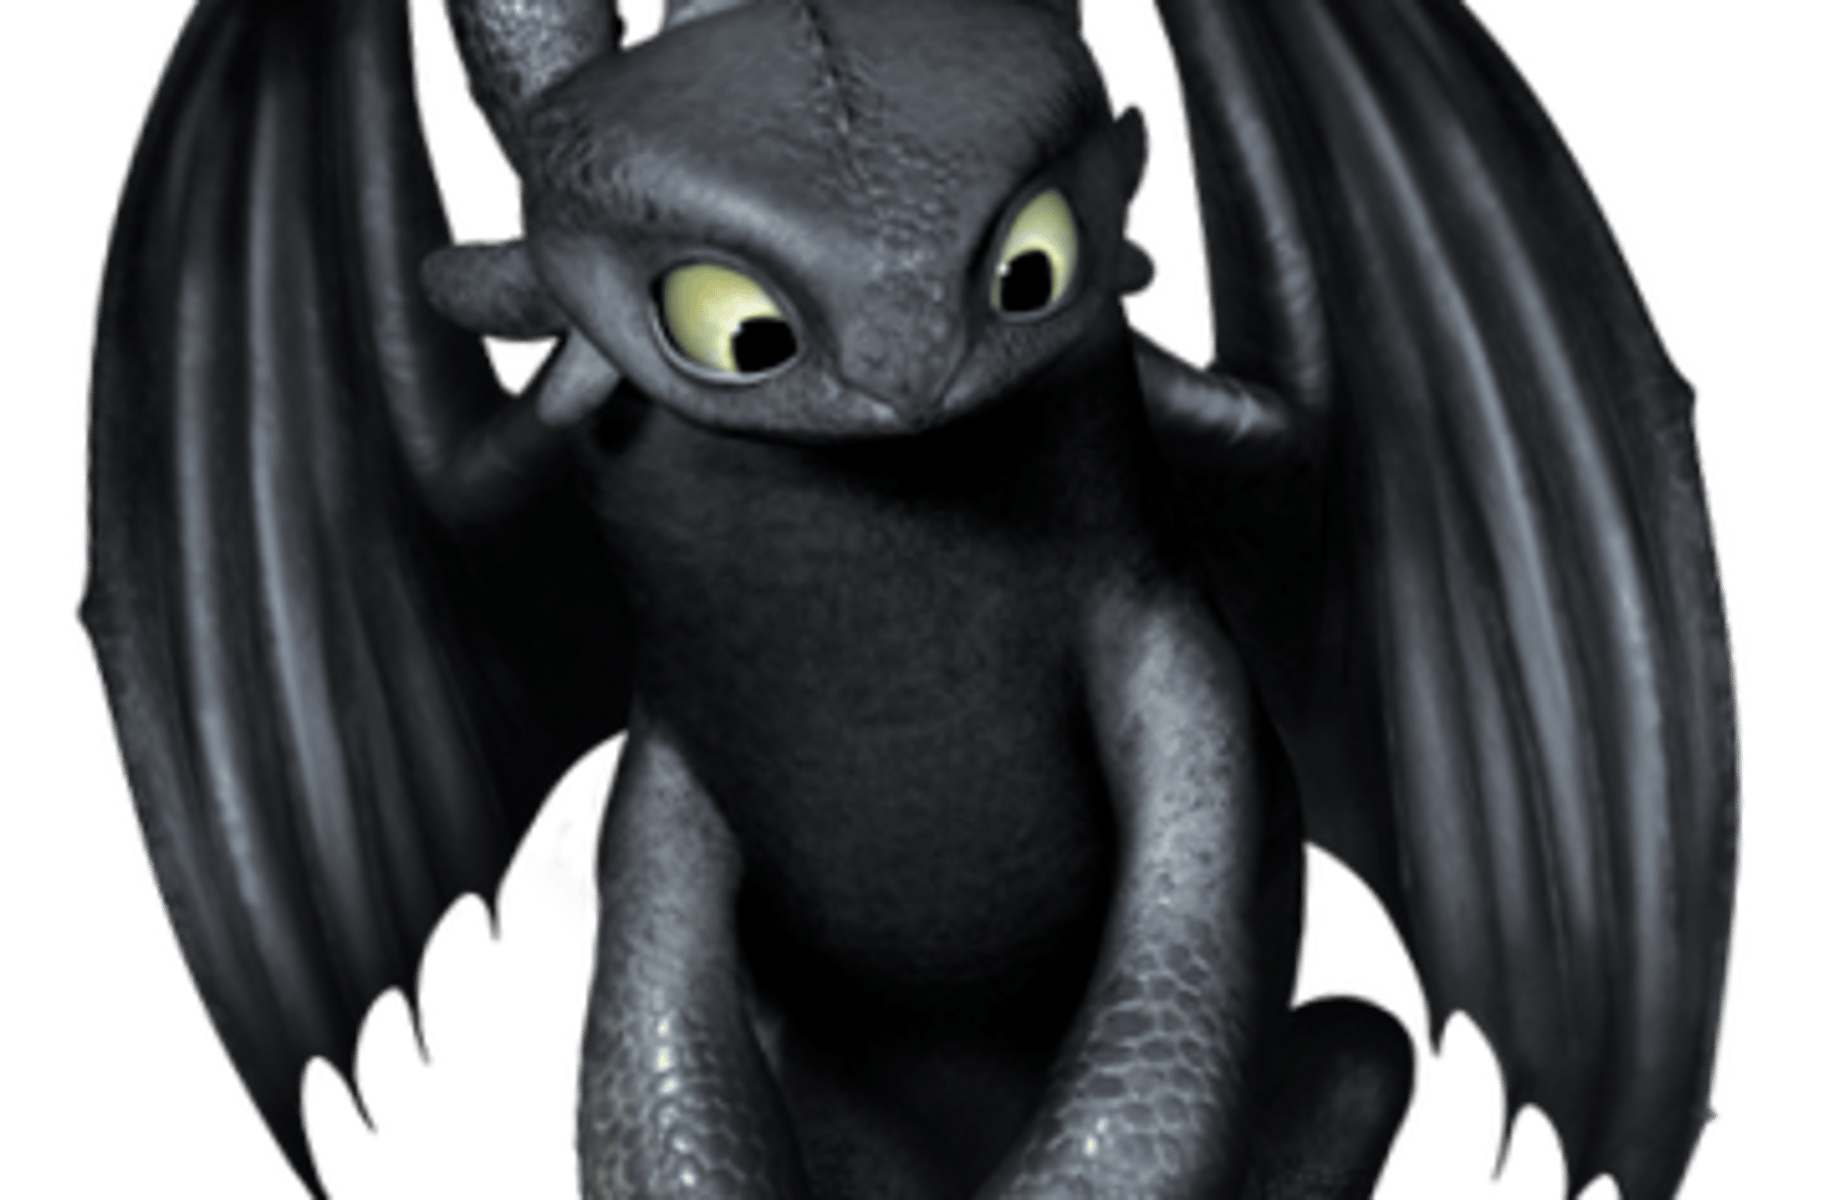 Toothless the dragon